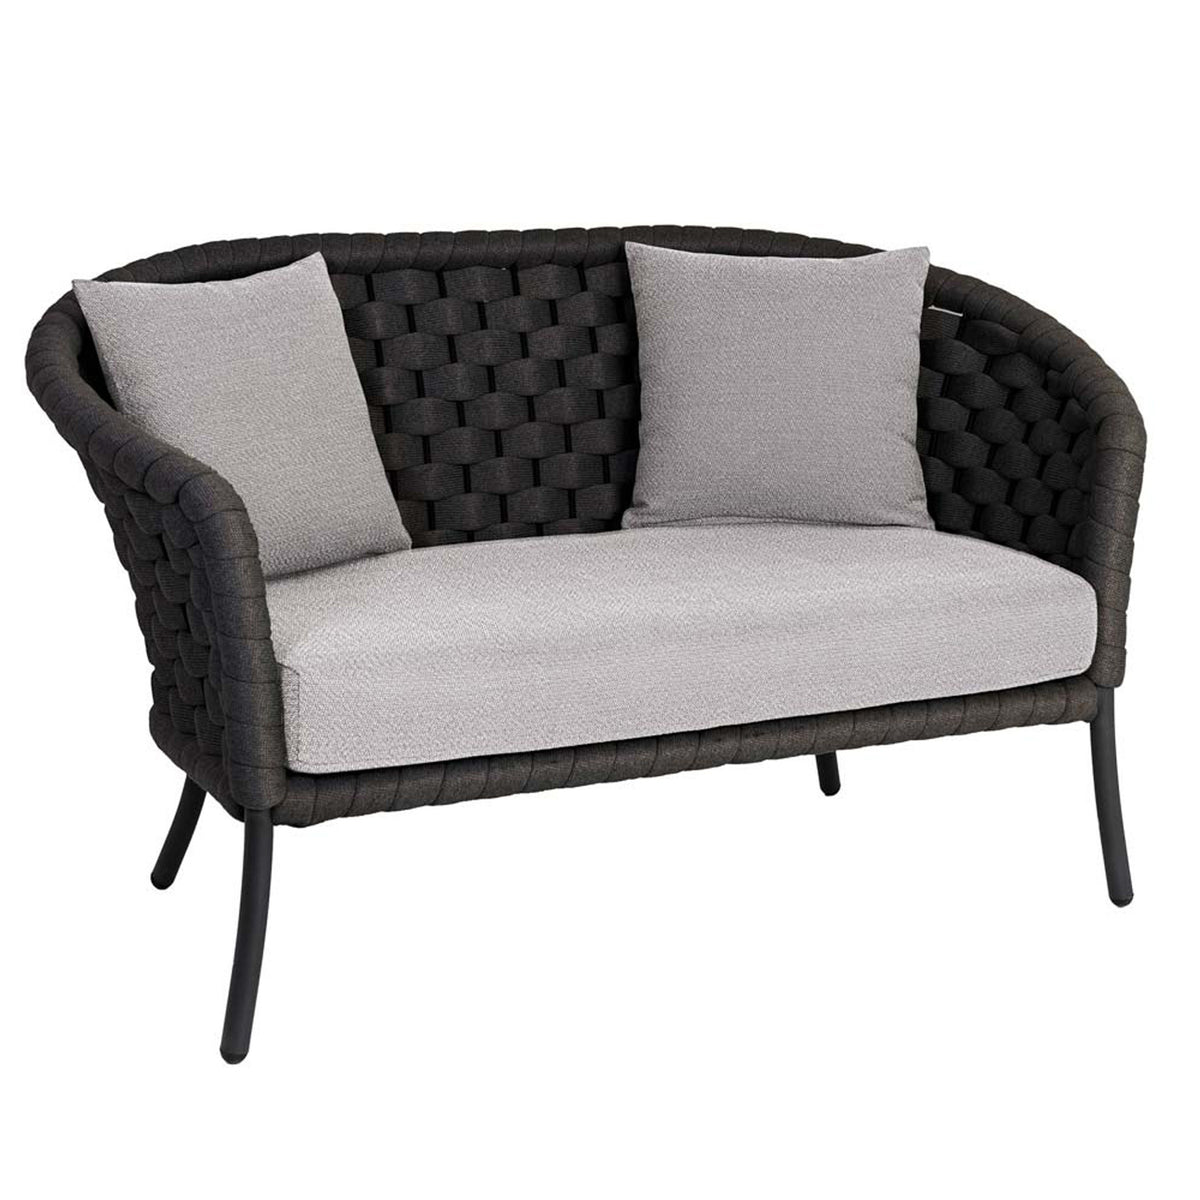 Alexander Rose Dark Grey Cordial 2 Seater Curved Sofa with Cushions